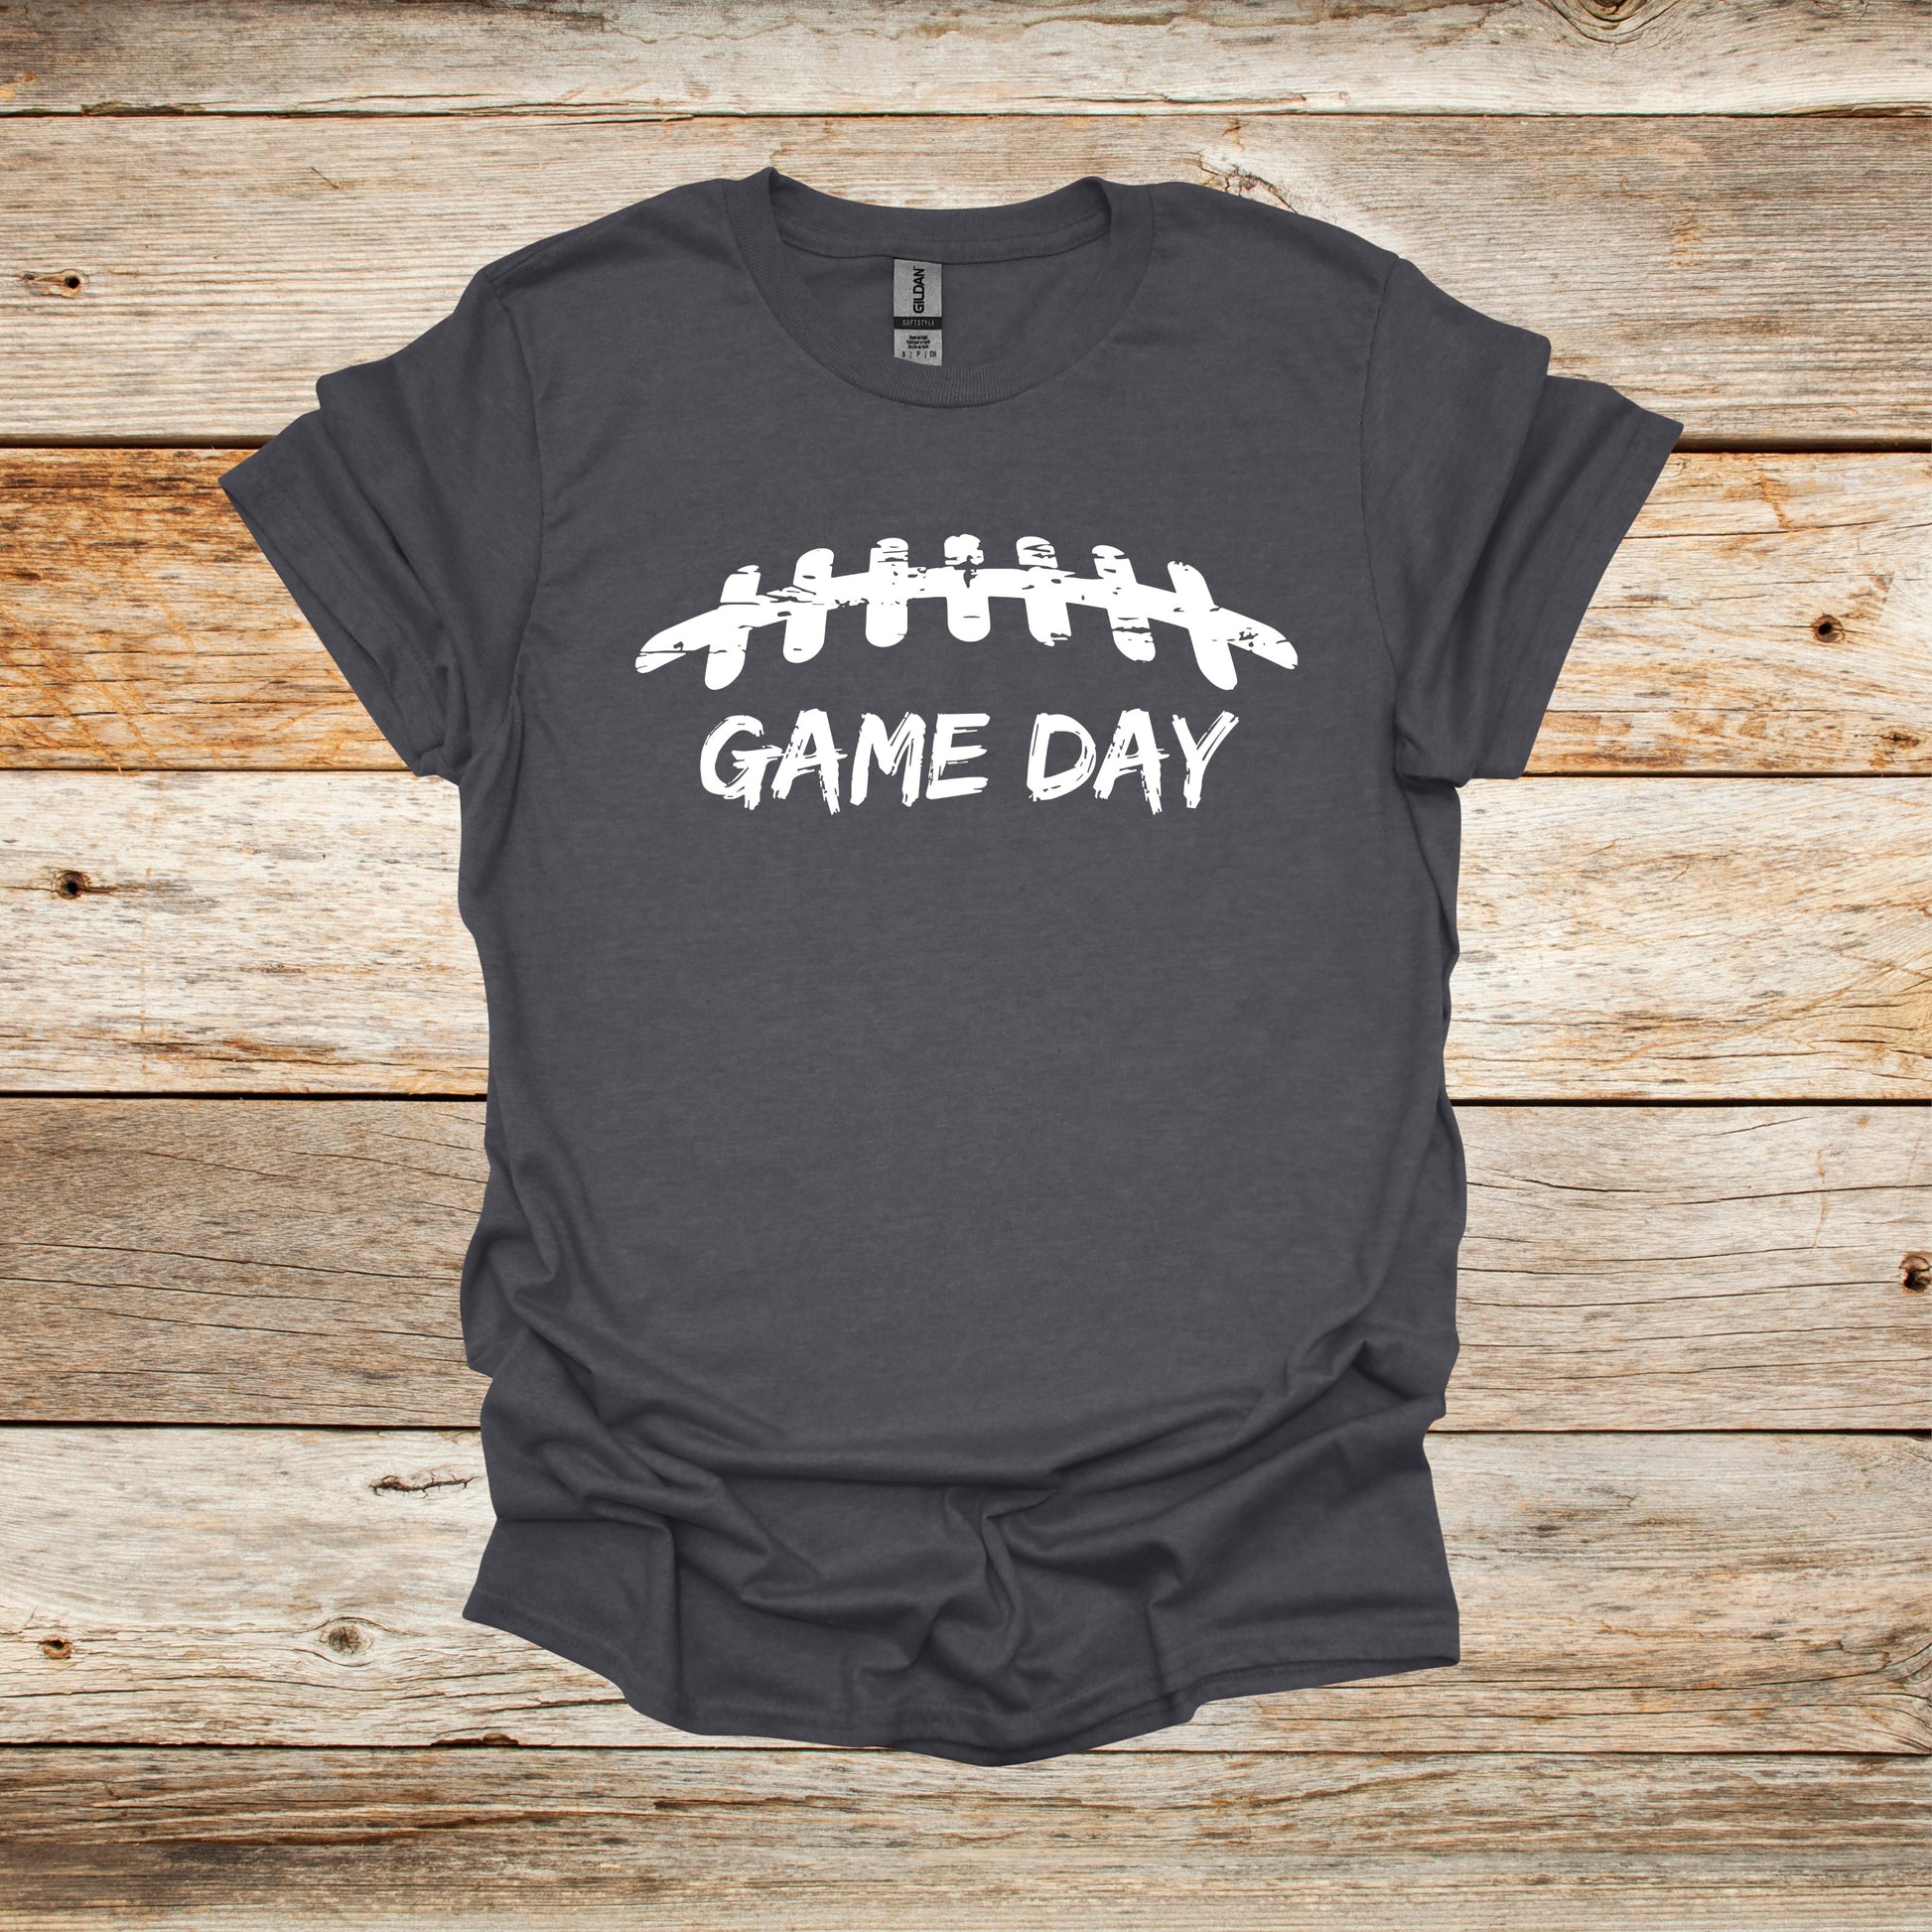 Football T-Shirt - Game Day Laces - Adult and Children's Tee Shirts - Game Day - Sports T-Shirts Graphic Avenue Dark Heather Adult Small 